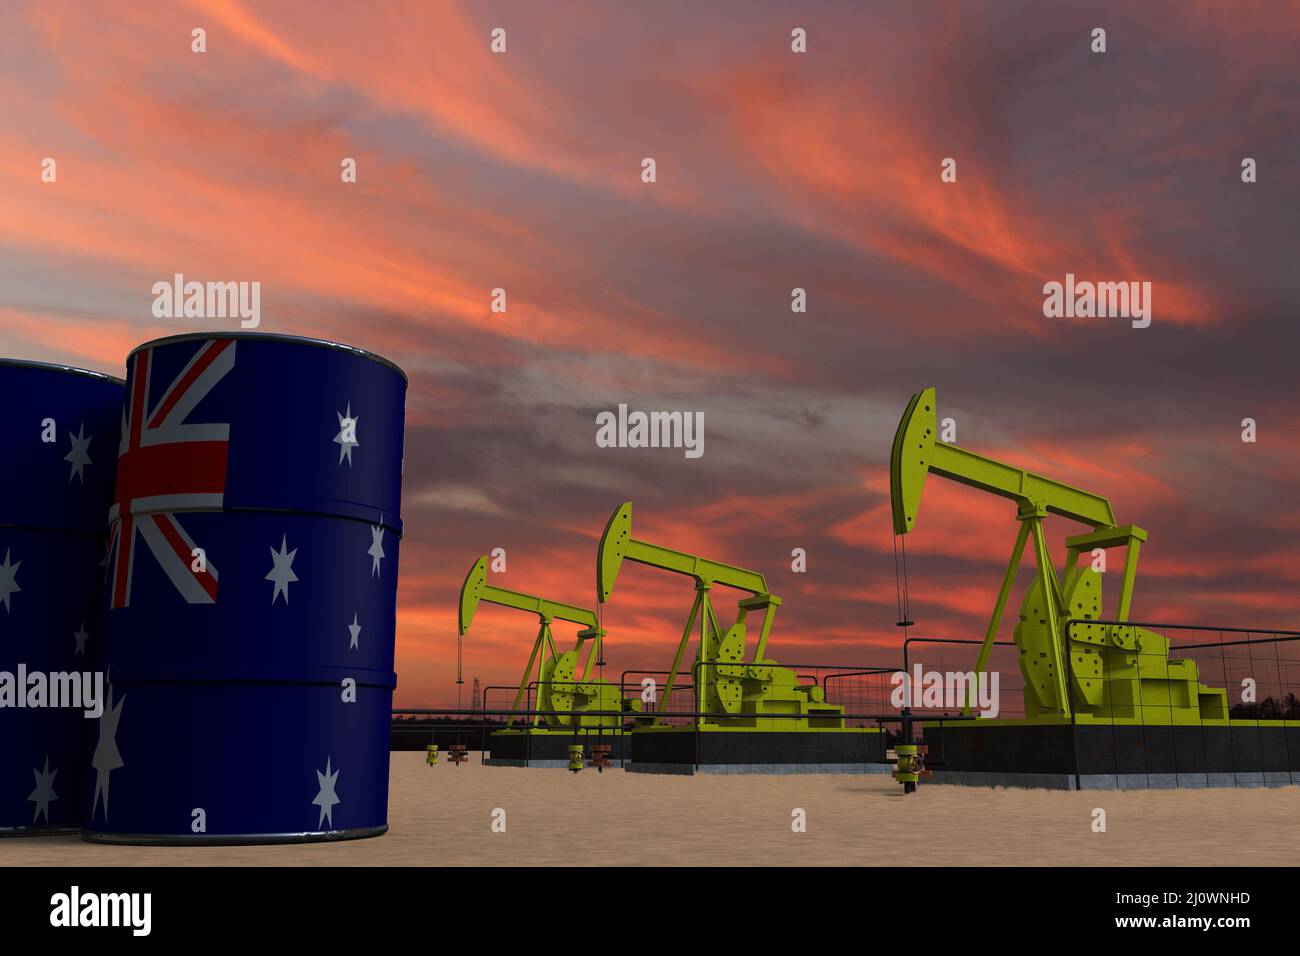 Nice pumpjack oil extraction and cloudy sky in sunset with the AUSTRALIA flag on oil barrels 3D rendering Stock Photo